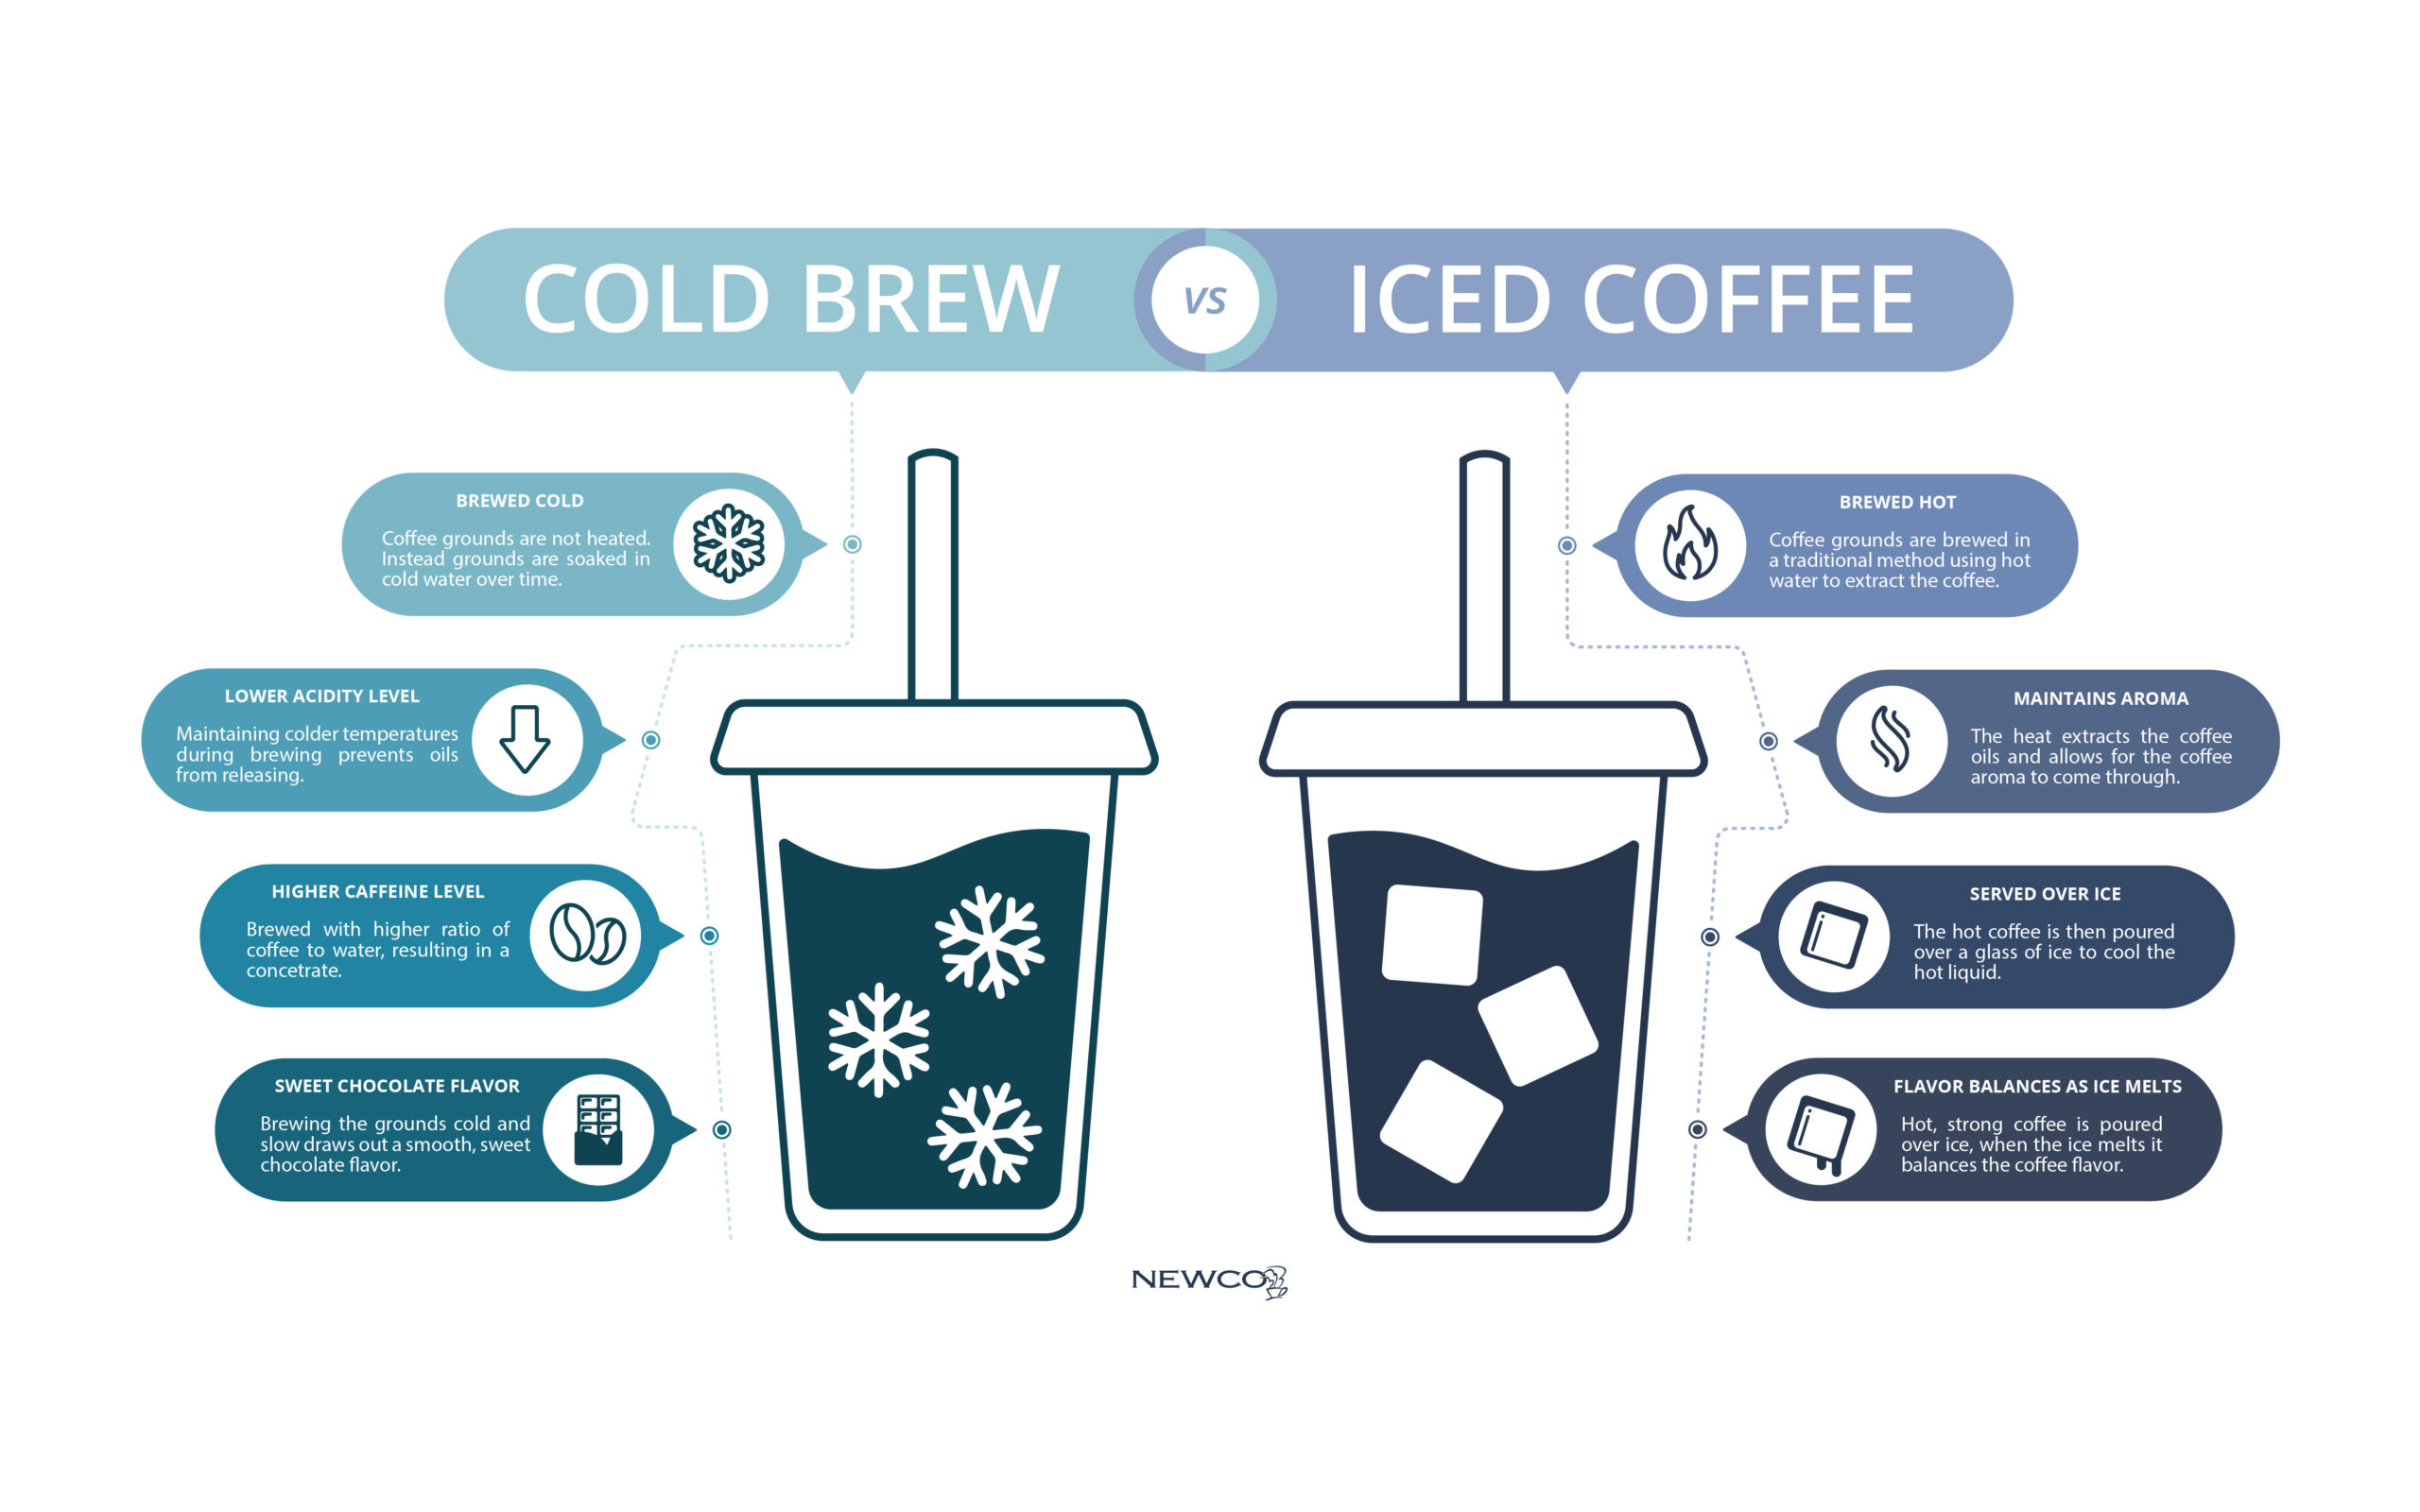 Cold Brew vs. Iced Coffee: What's the Difference?